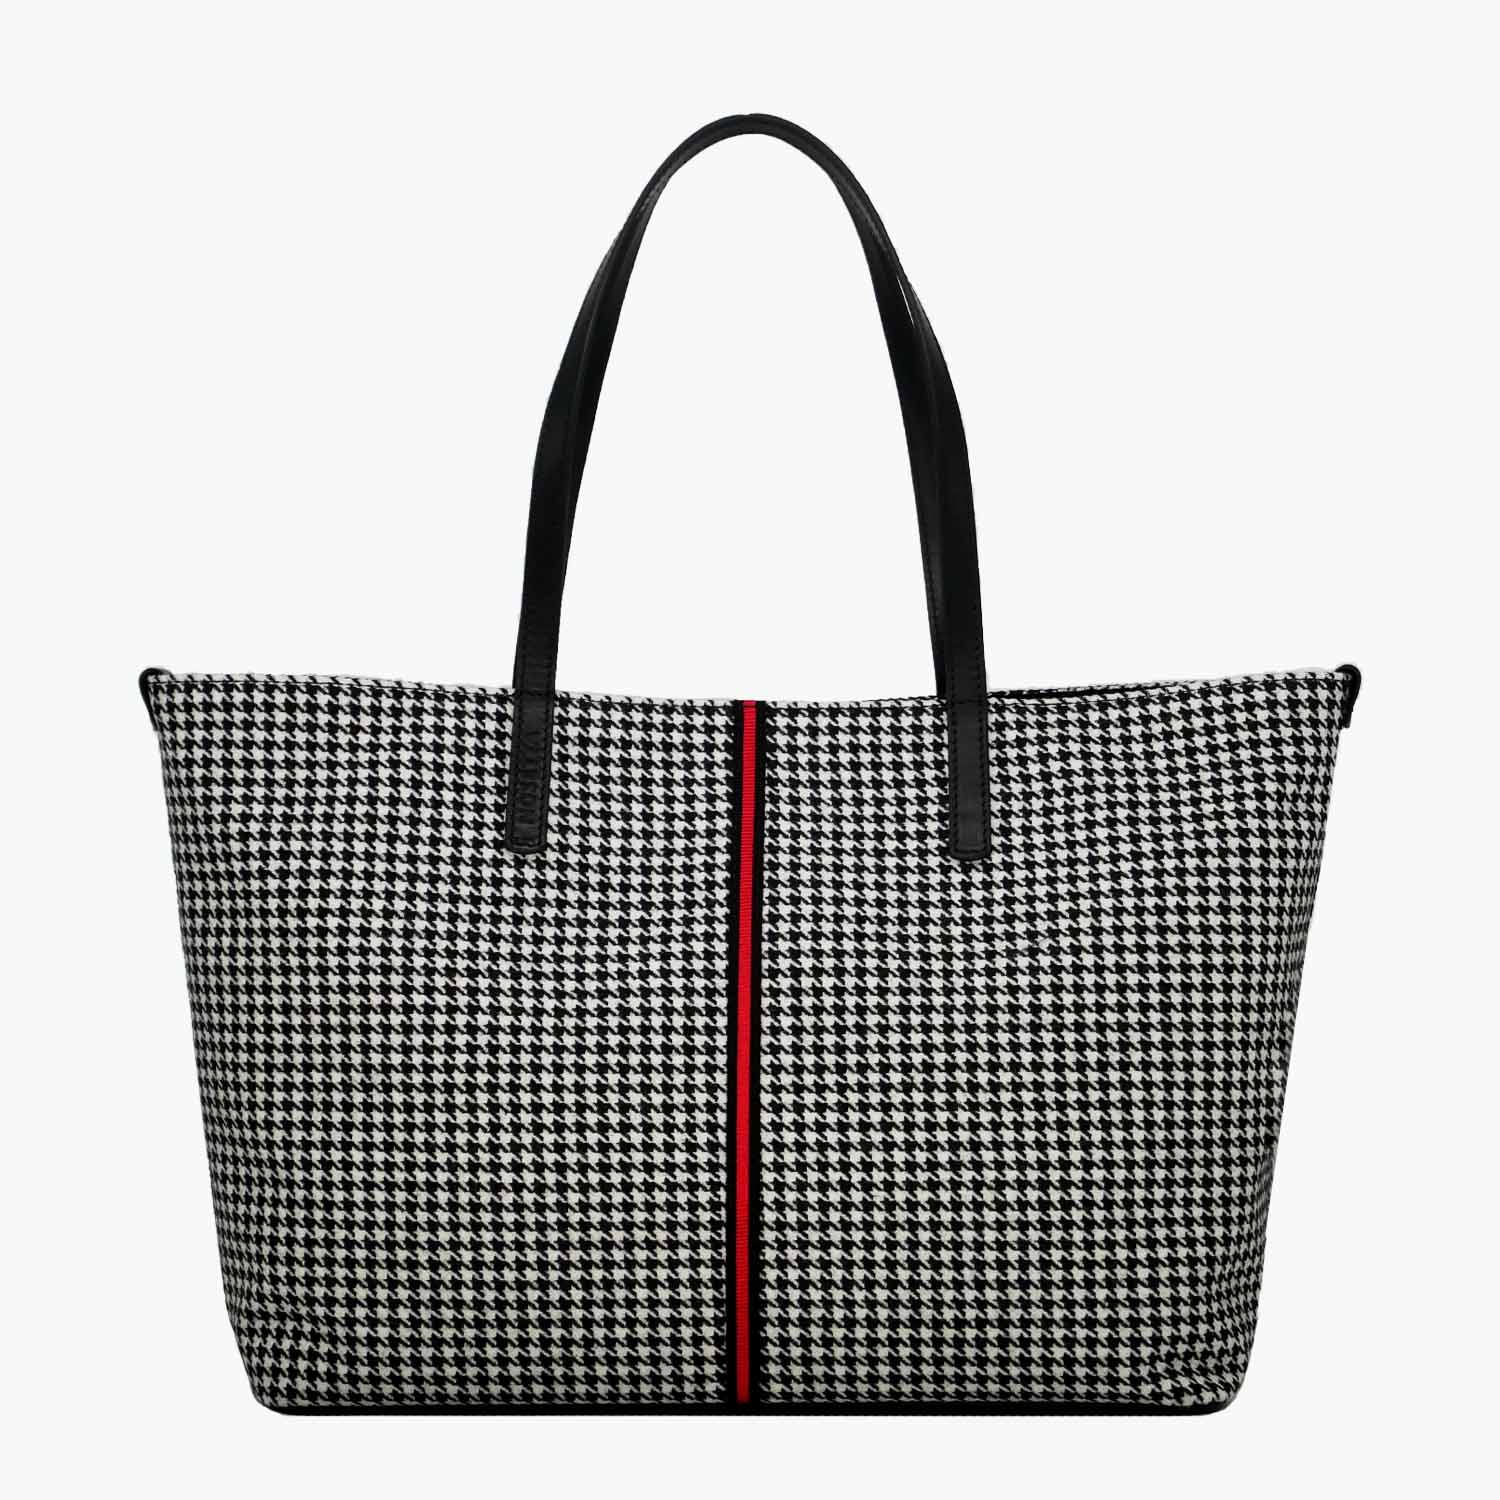 Celesia Medium Tote Houndstooth Wool and Leather